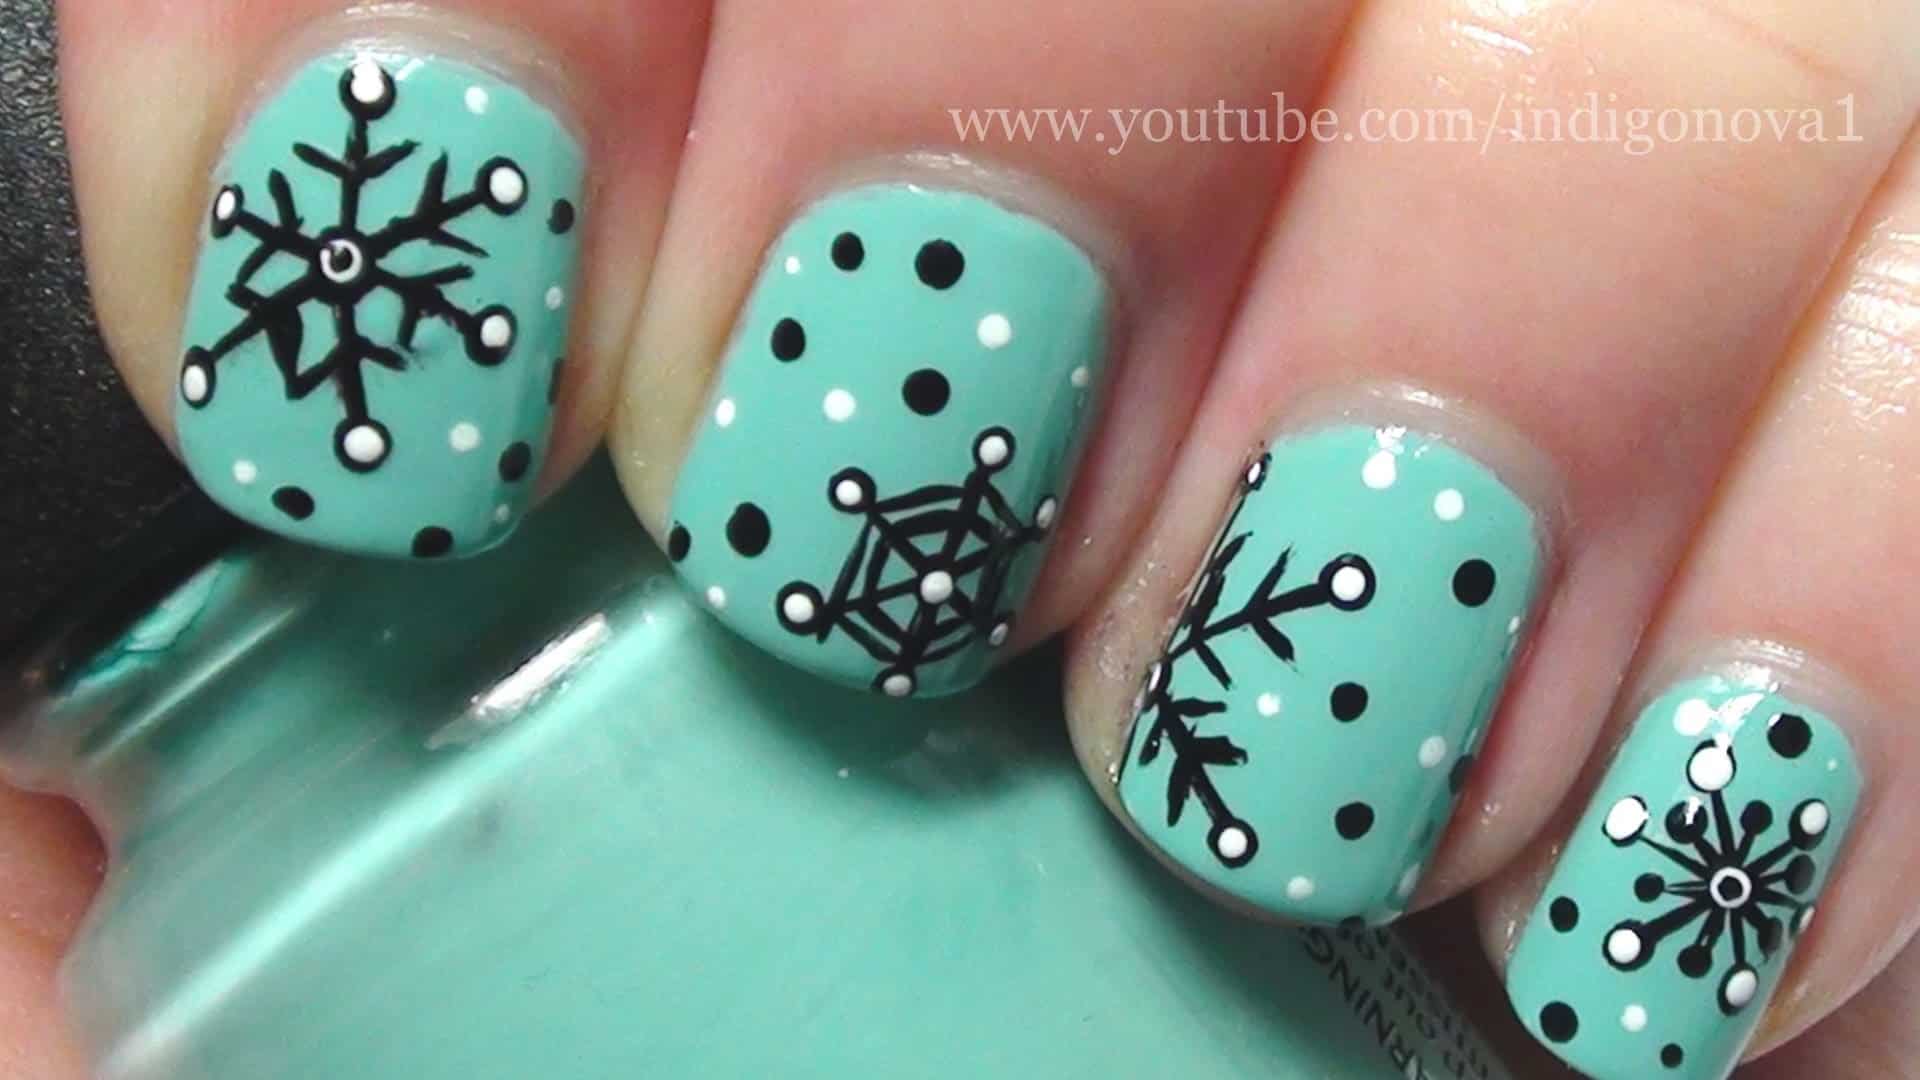 Mint with black snowflakes